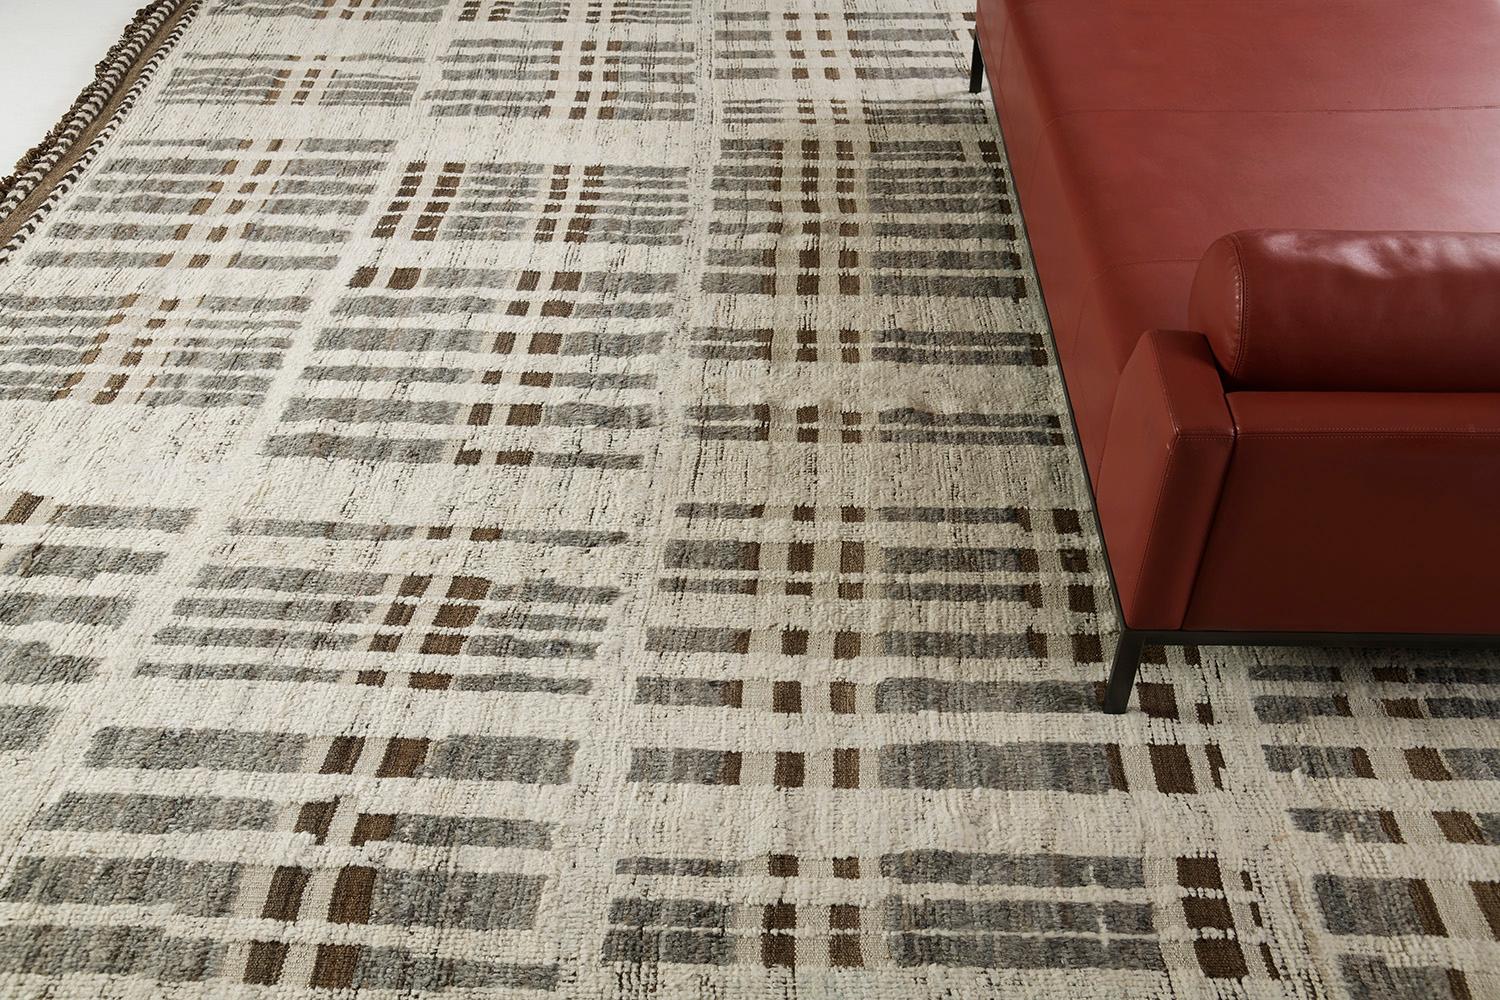 Bacatta uses linework and color to create definition and movement into handwoven wool. Line detailing in the combination of natural gray and brown tones fascinatingly moves across the rug. Detailed natural pile weave runs around the border with